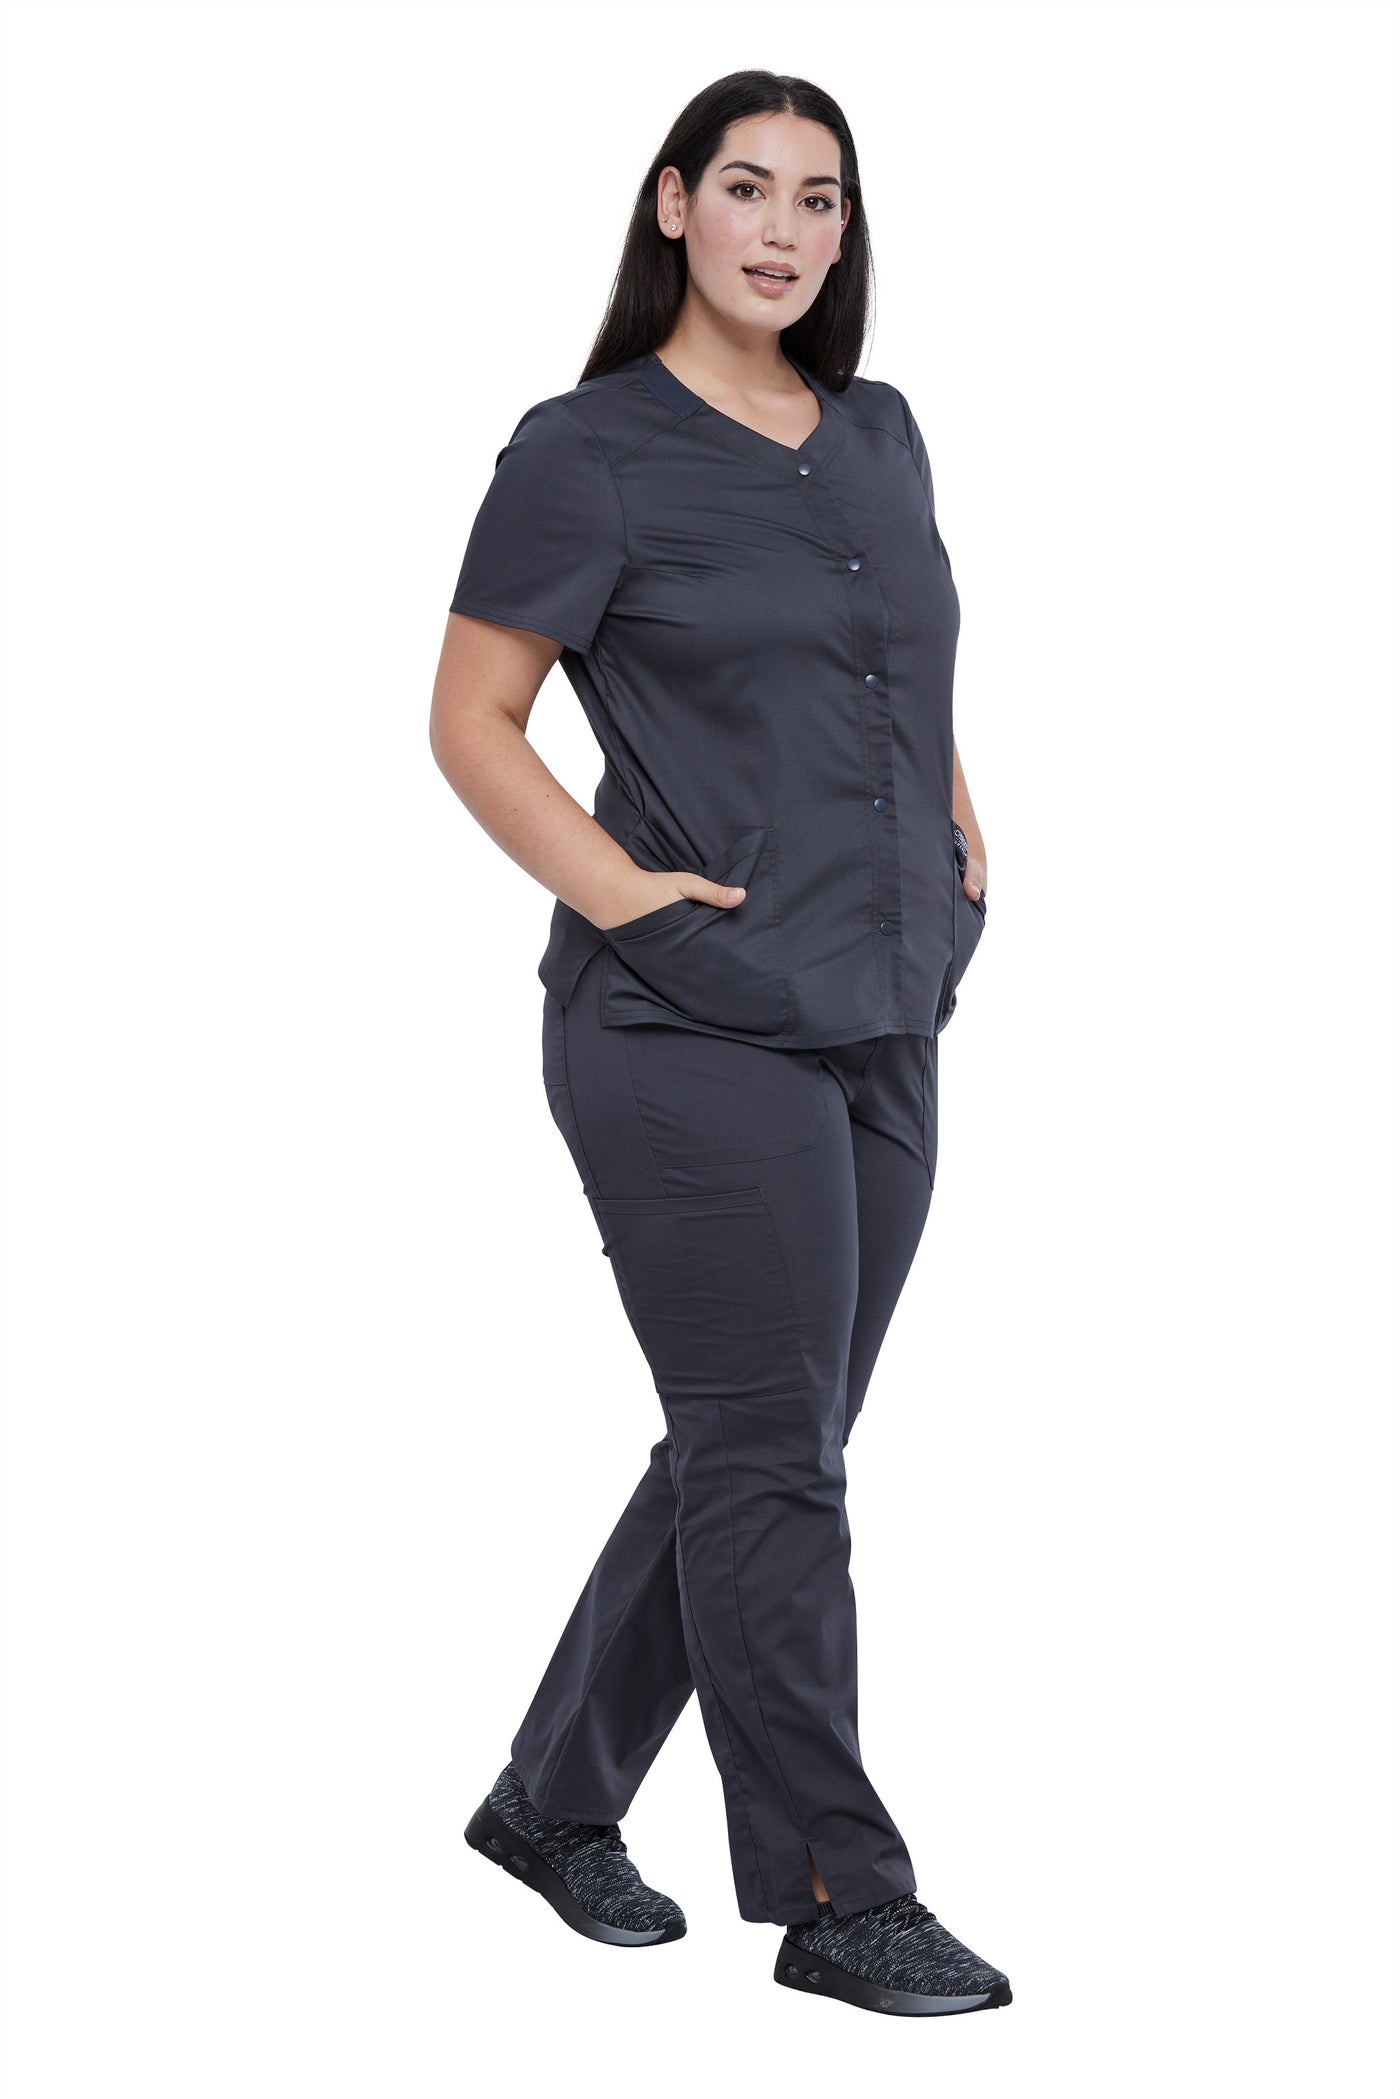 Pewter - Cherokee Workwear Revolution Snap Front V-Neck Top